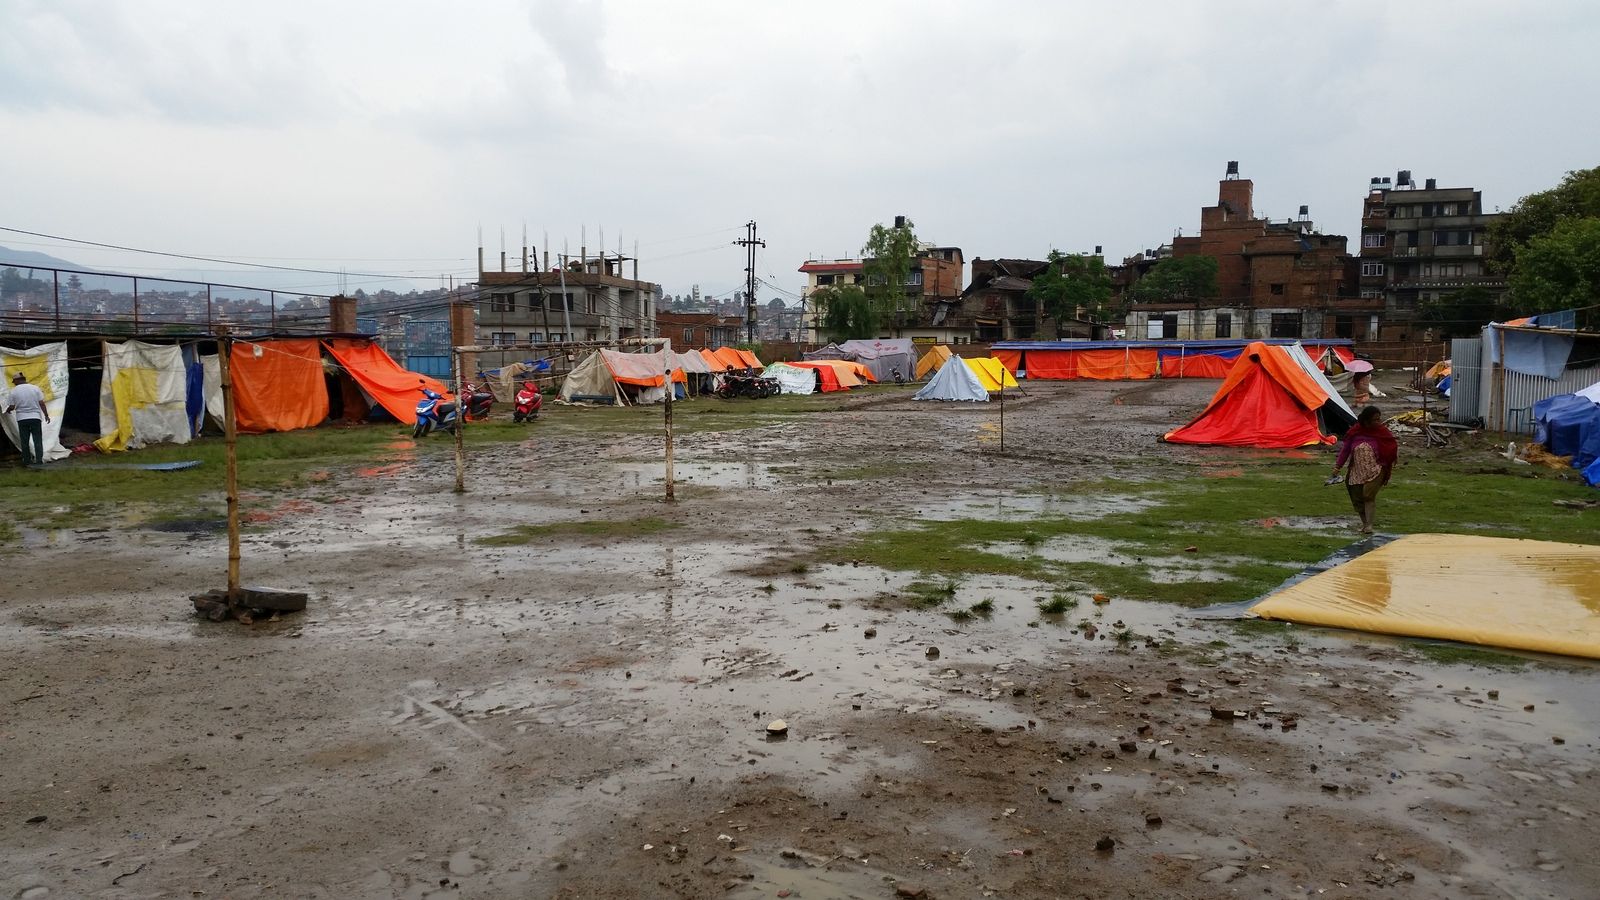 In this suburb of Kathmandu, nearly all of the buildings were destroyed by the original temblor in Nepal. The school’s football field is being transformed into a tent city.